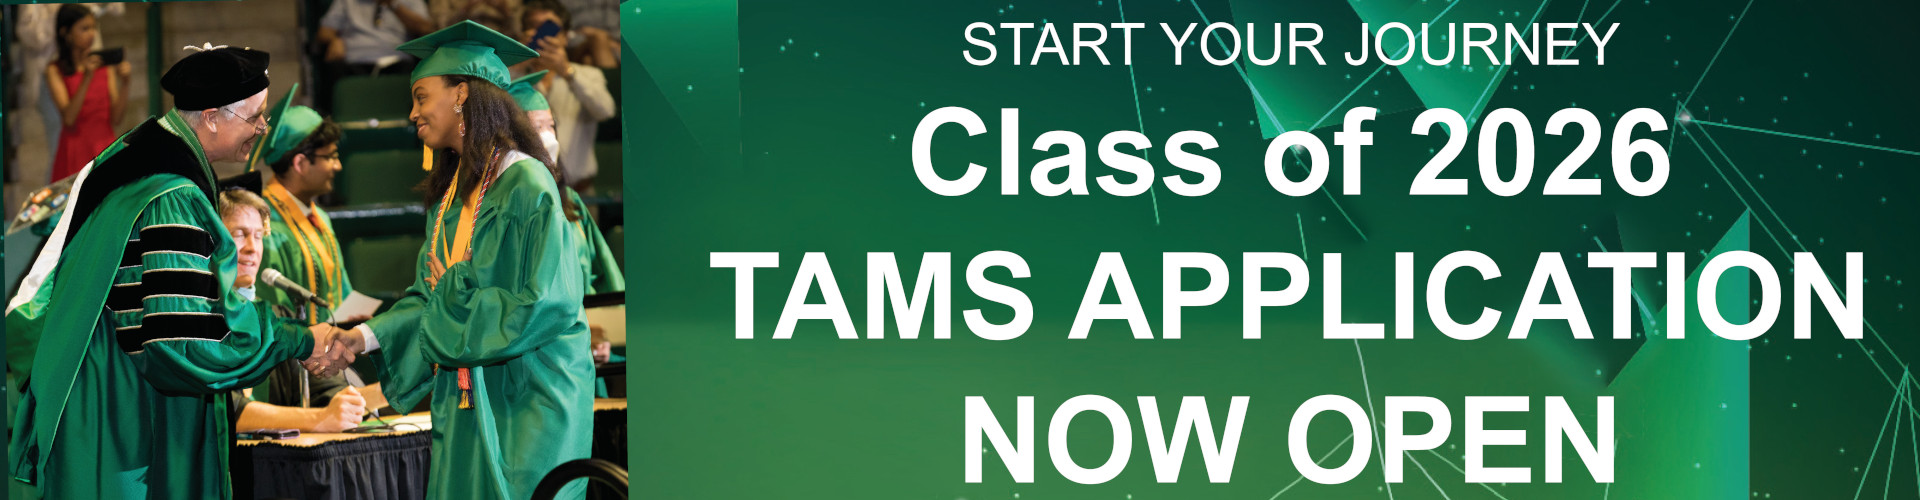 TAMS Class of 2026 Application opens August 1, 2022